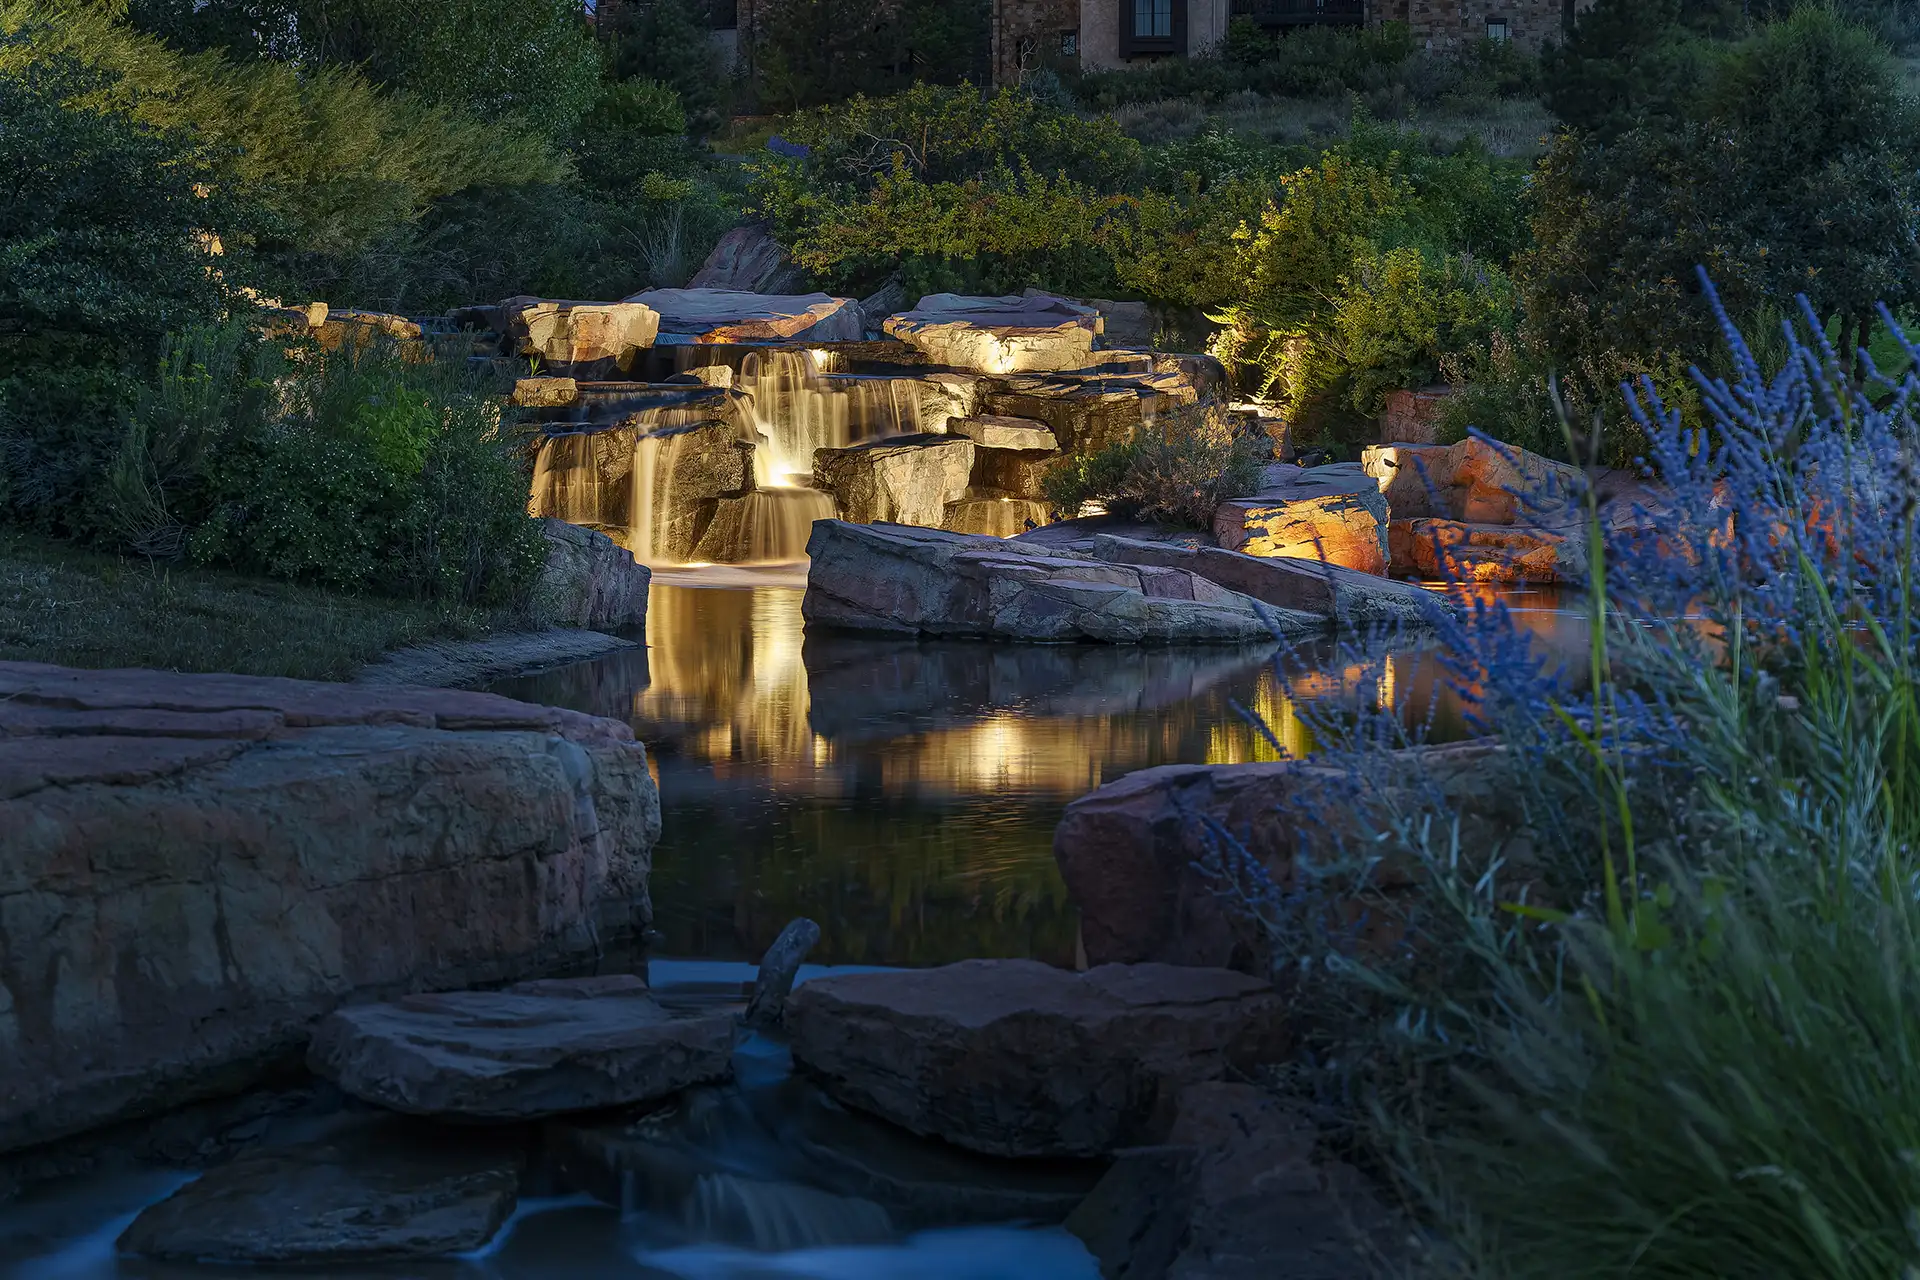 Ravenna image 2 waterfall landscaping Lighthouse Outdoor Lighting and Audio Denver CO